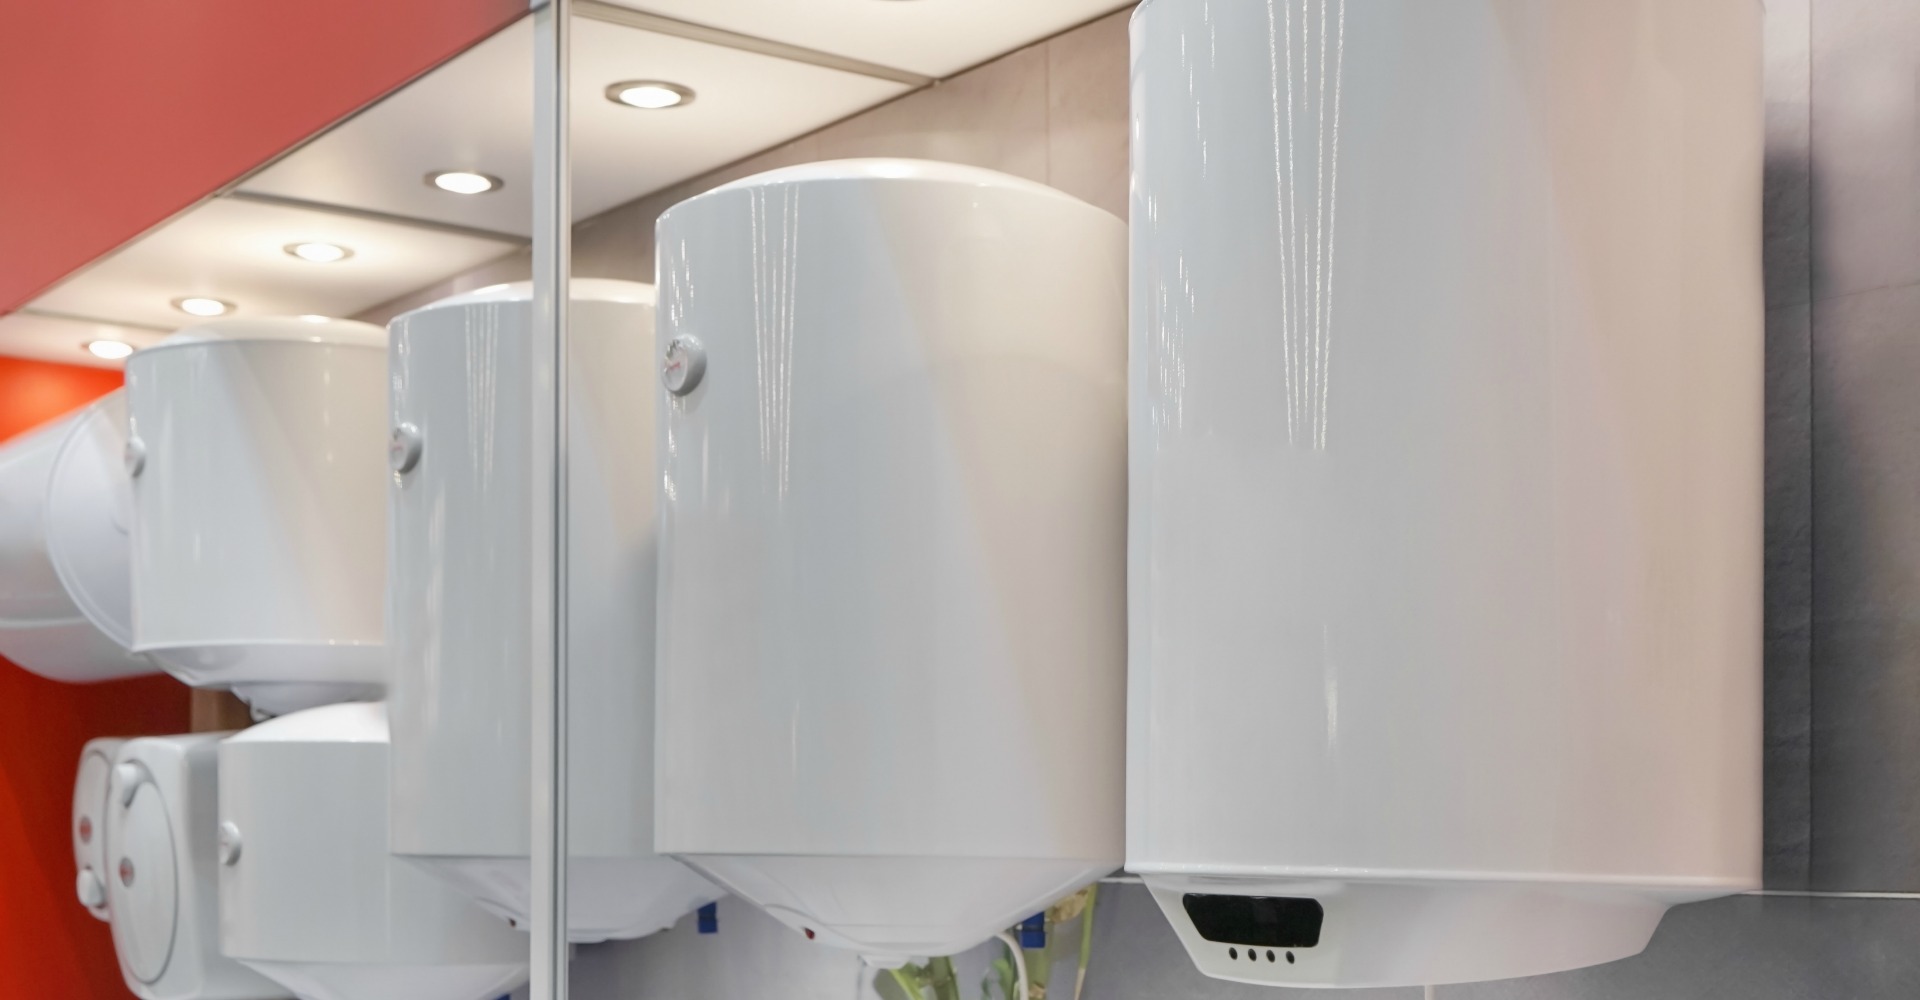 water heaters Water Heaters- Which Type Is the Right One for Your Home? - 2